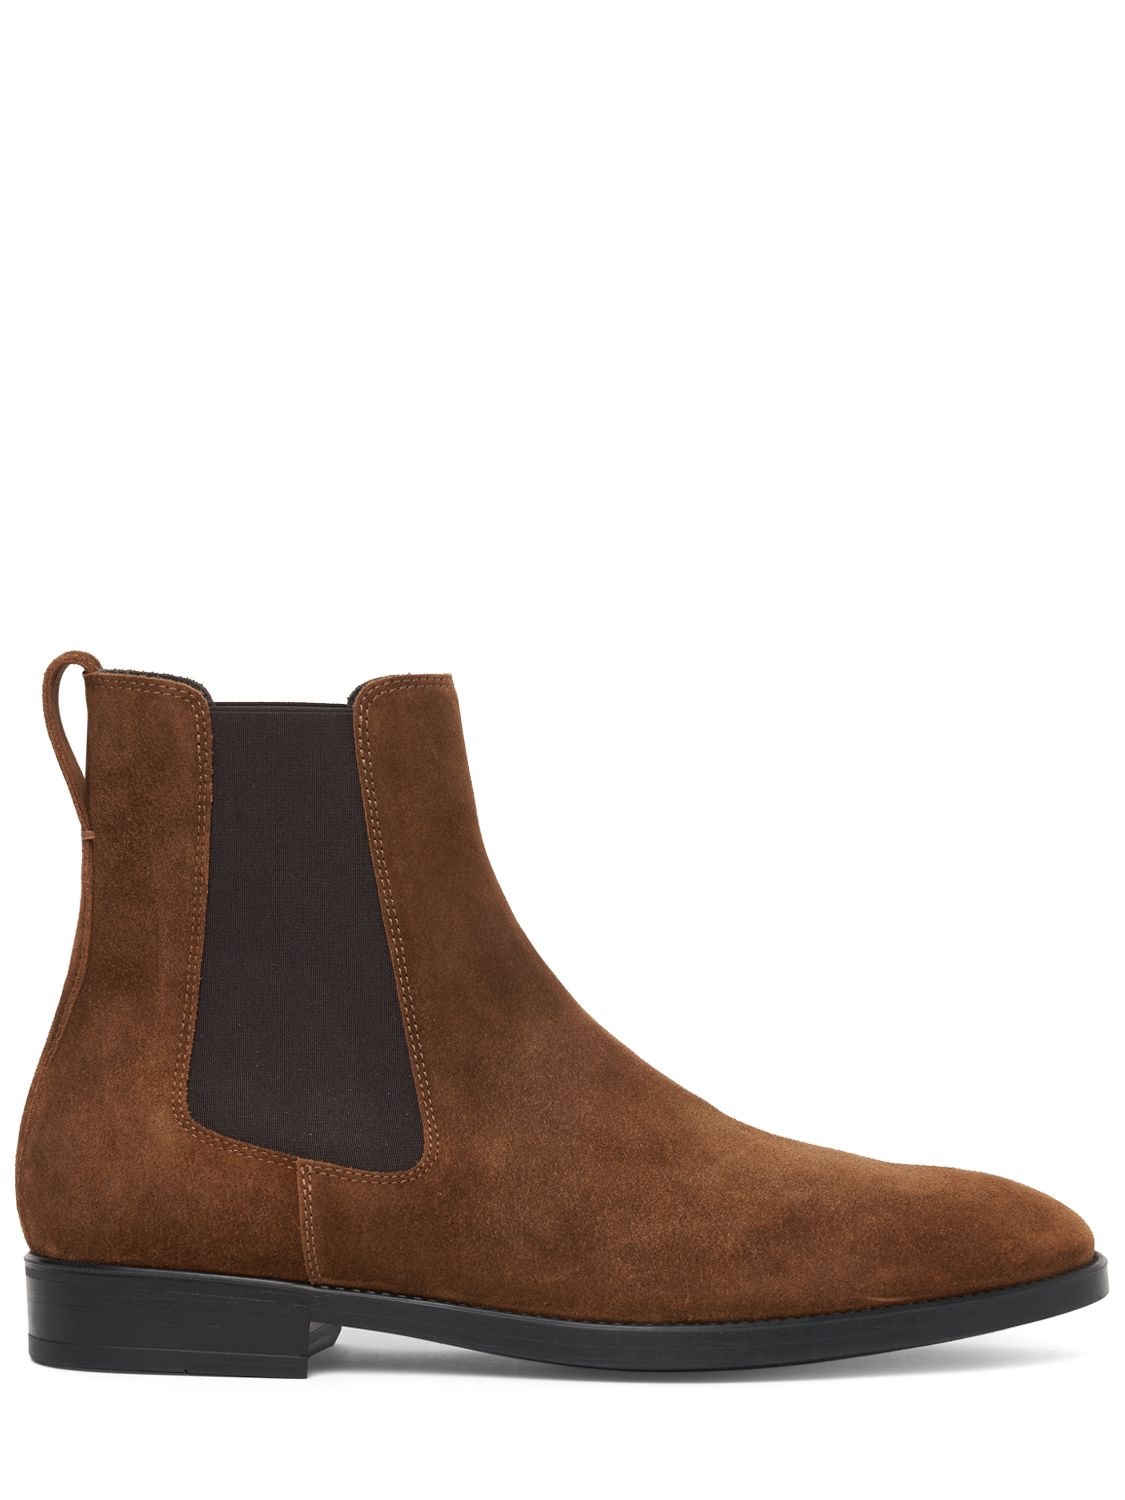 Tom Ford Dressing Gownrt Suede Ankle Boots In Tobacco